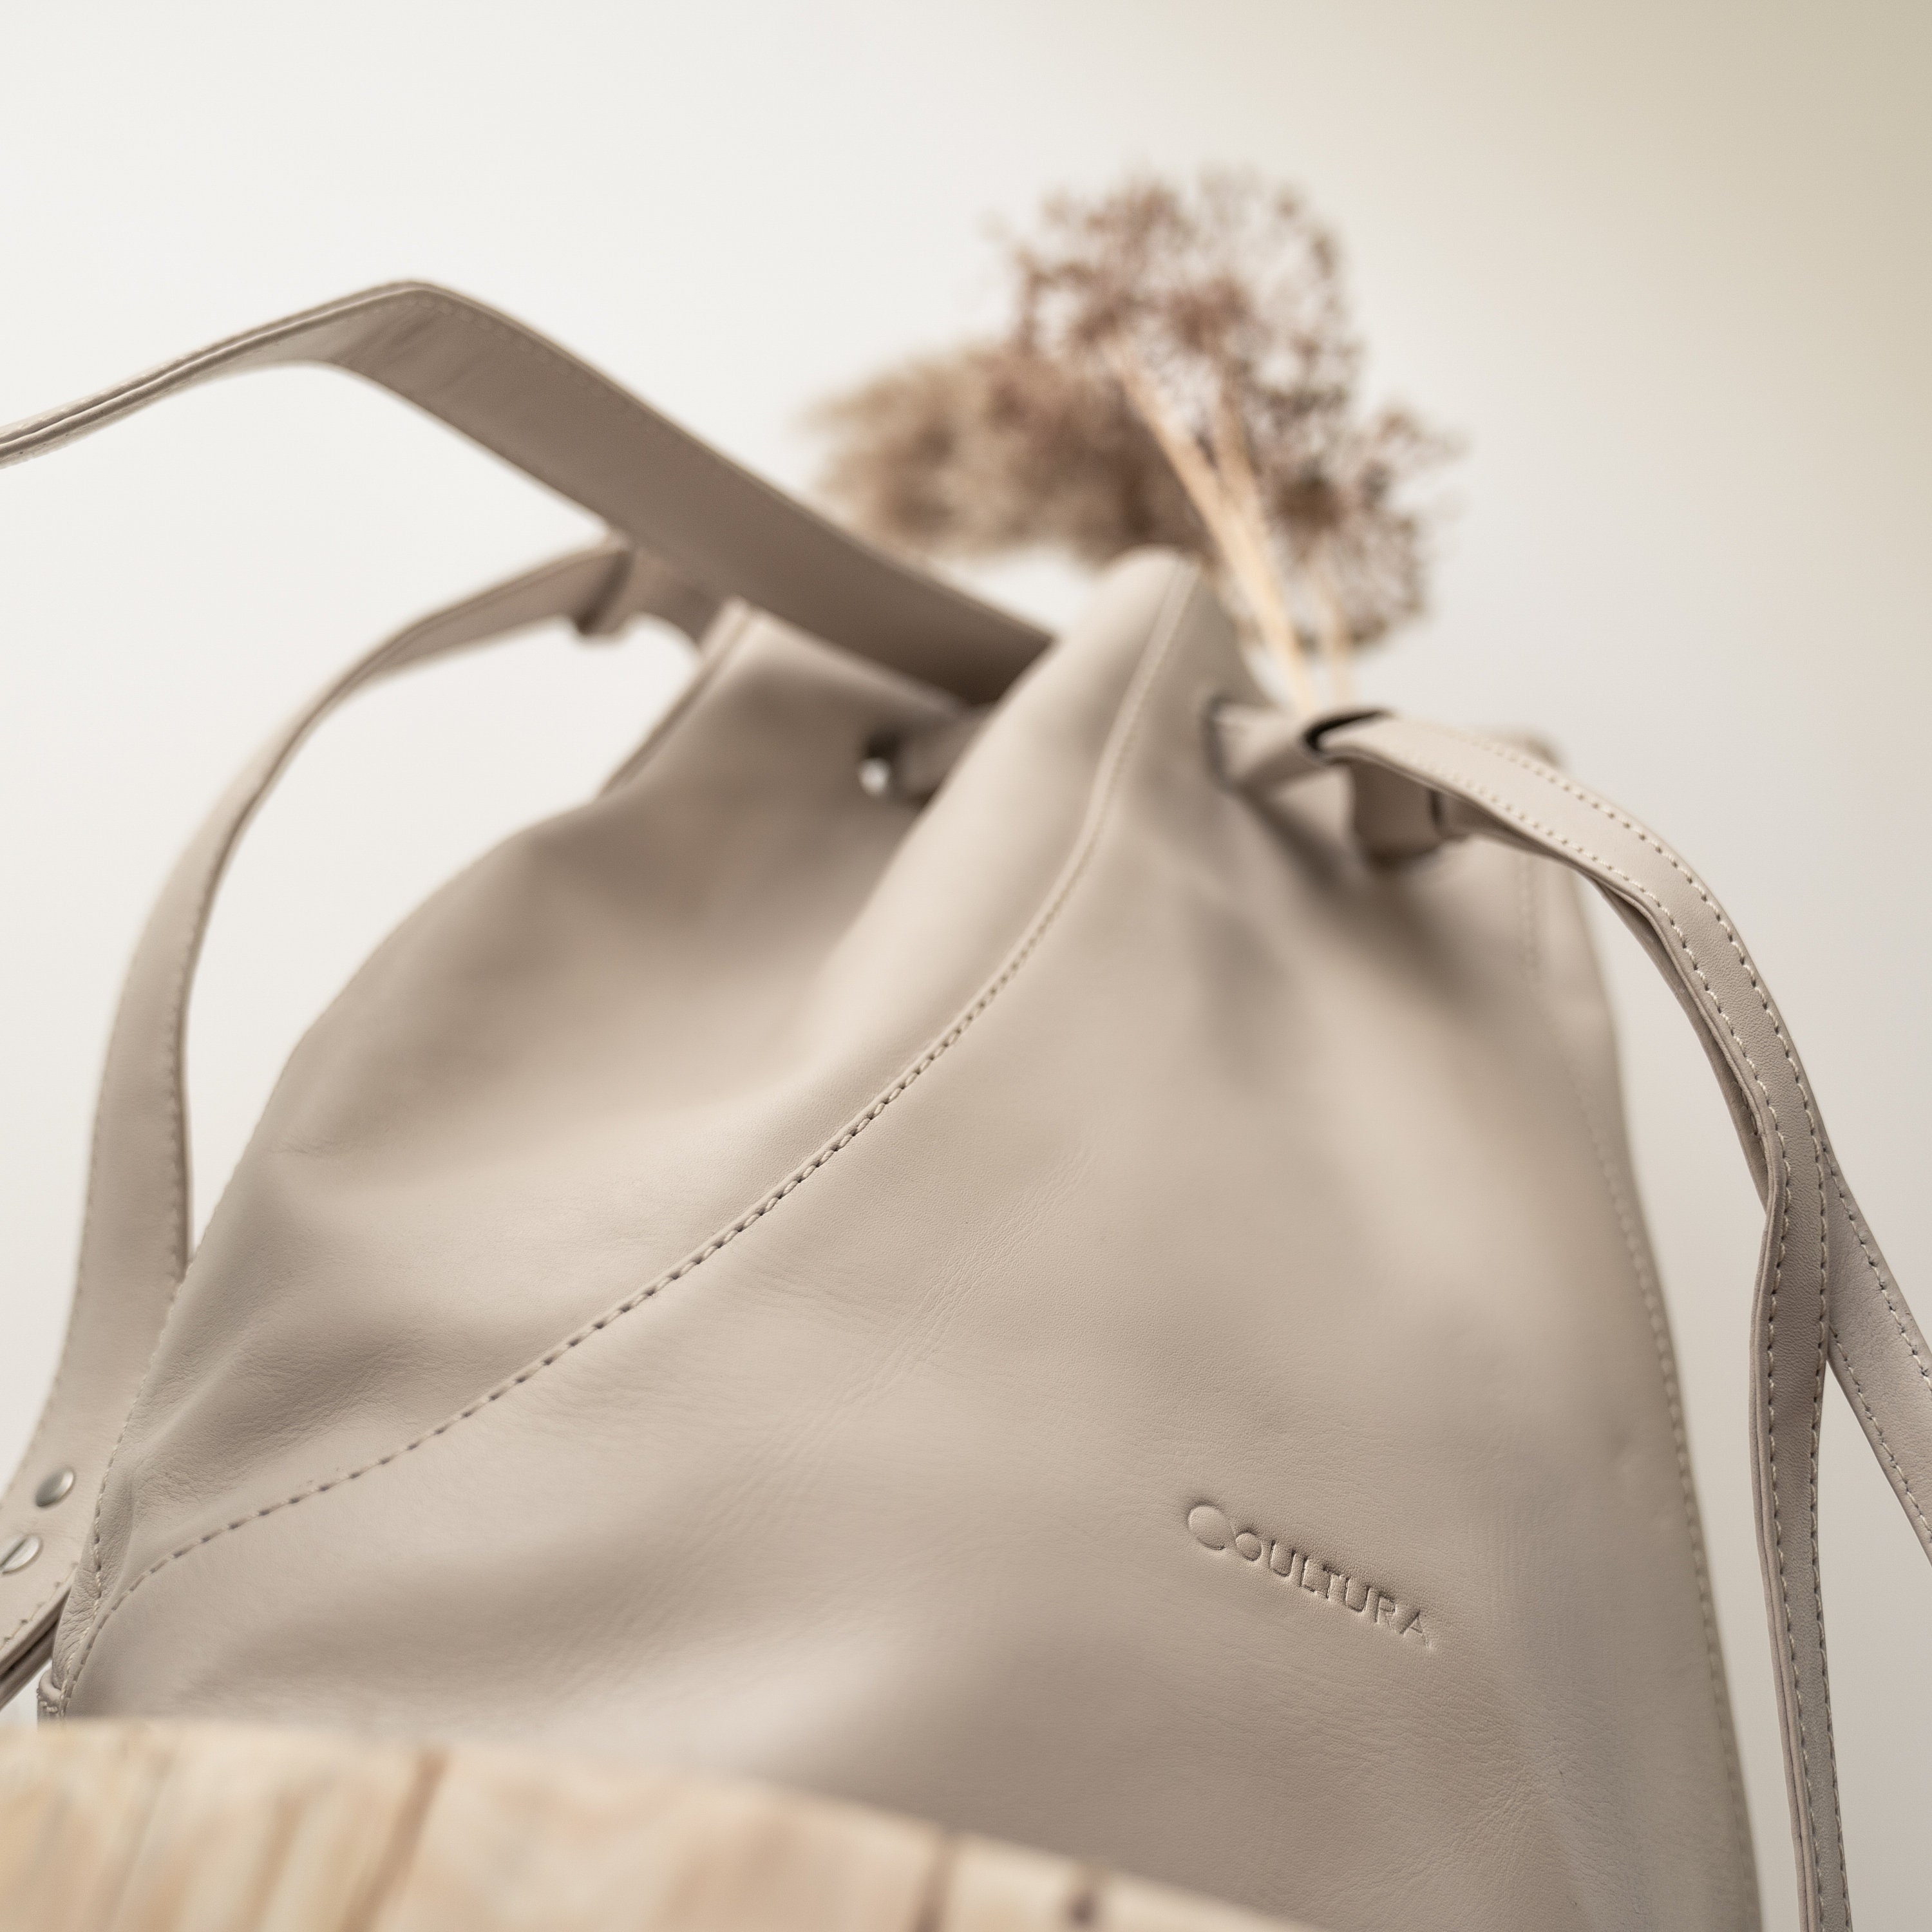 Leather Bucket Bag for Women, Soft Leather Bag, High Quality Leather Bag, Christmas Gift for Mom from Daughter, Christmas Gift List